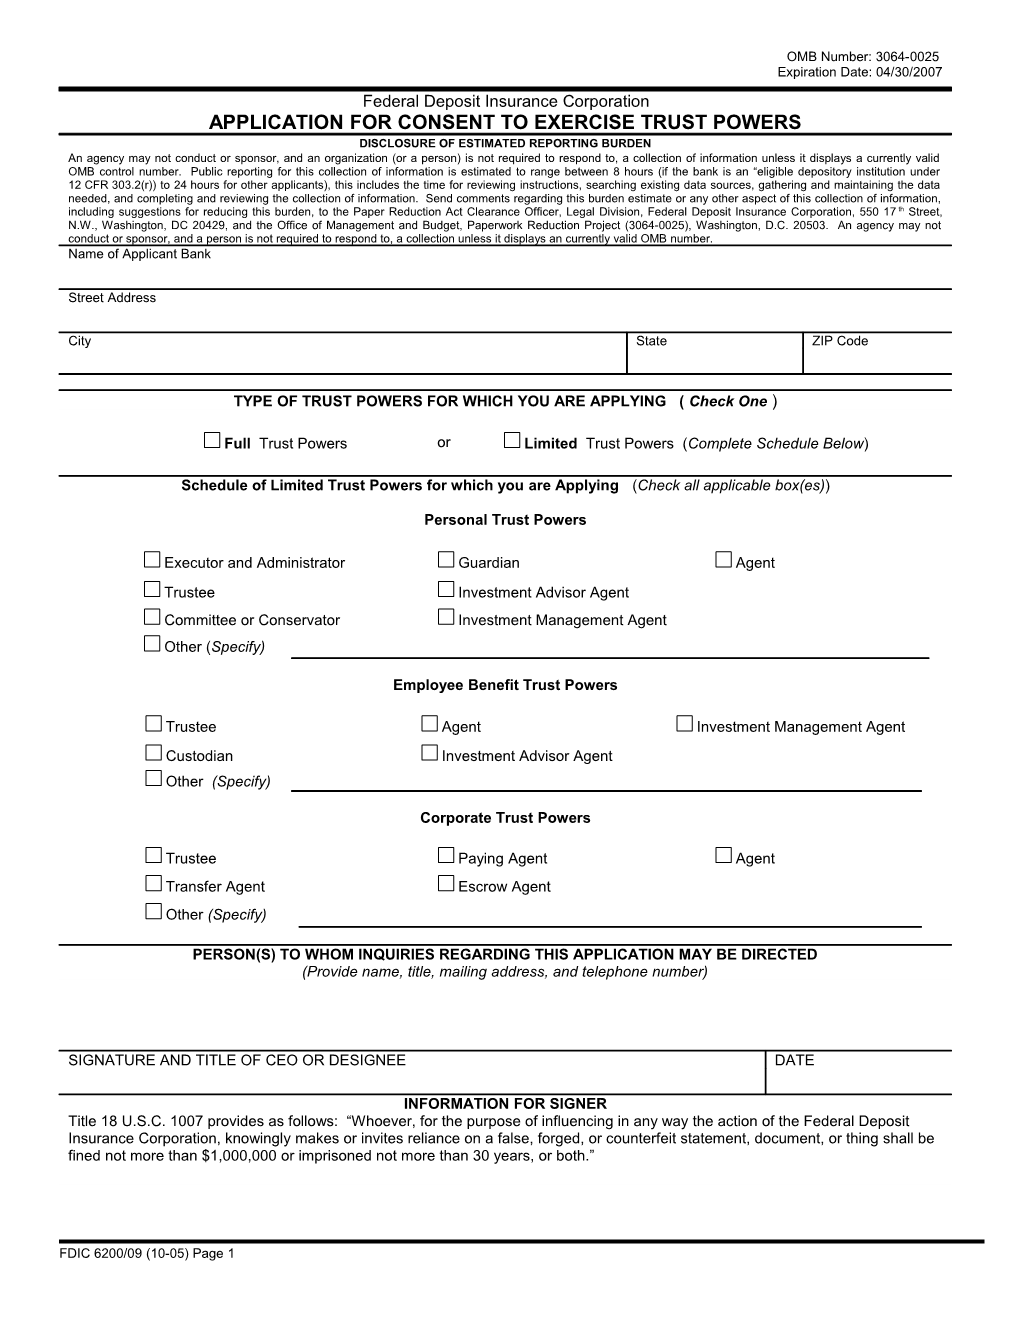 FDIC 6200-09, Application for Consent to Exercise Trust Powers